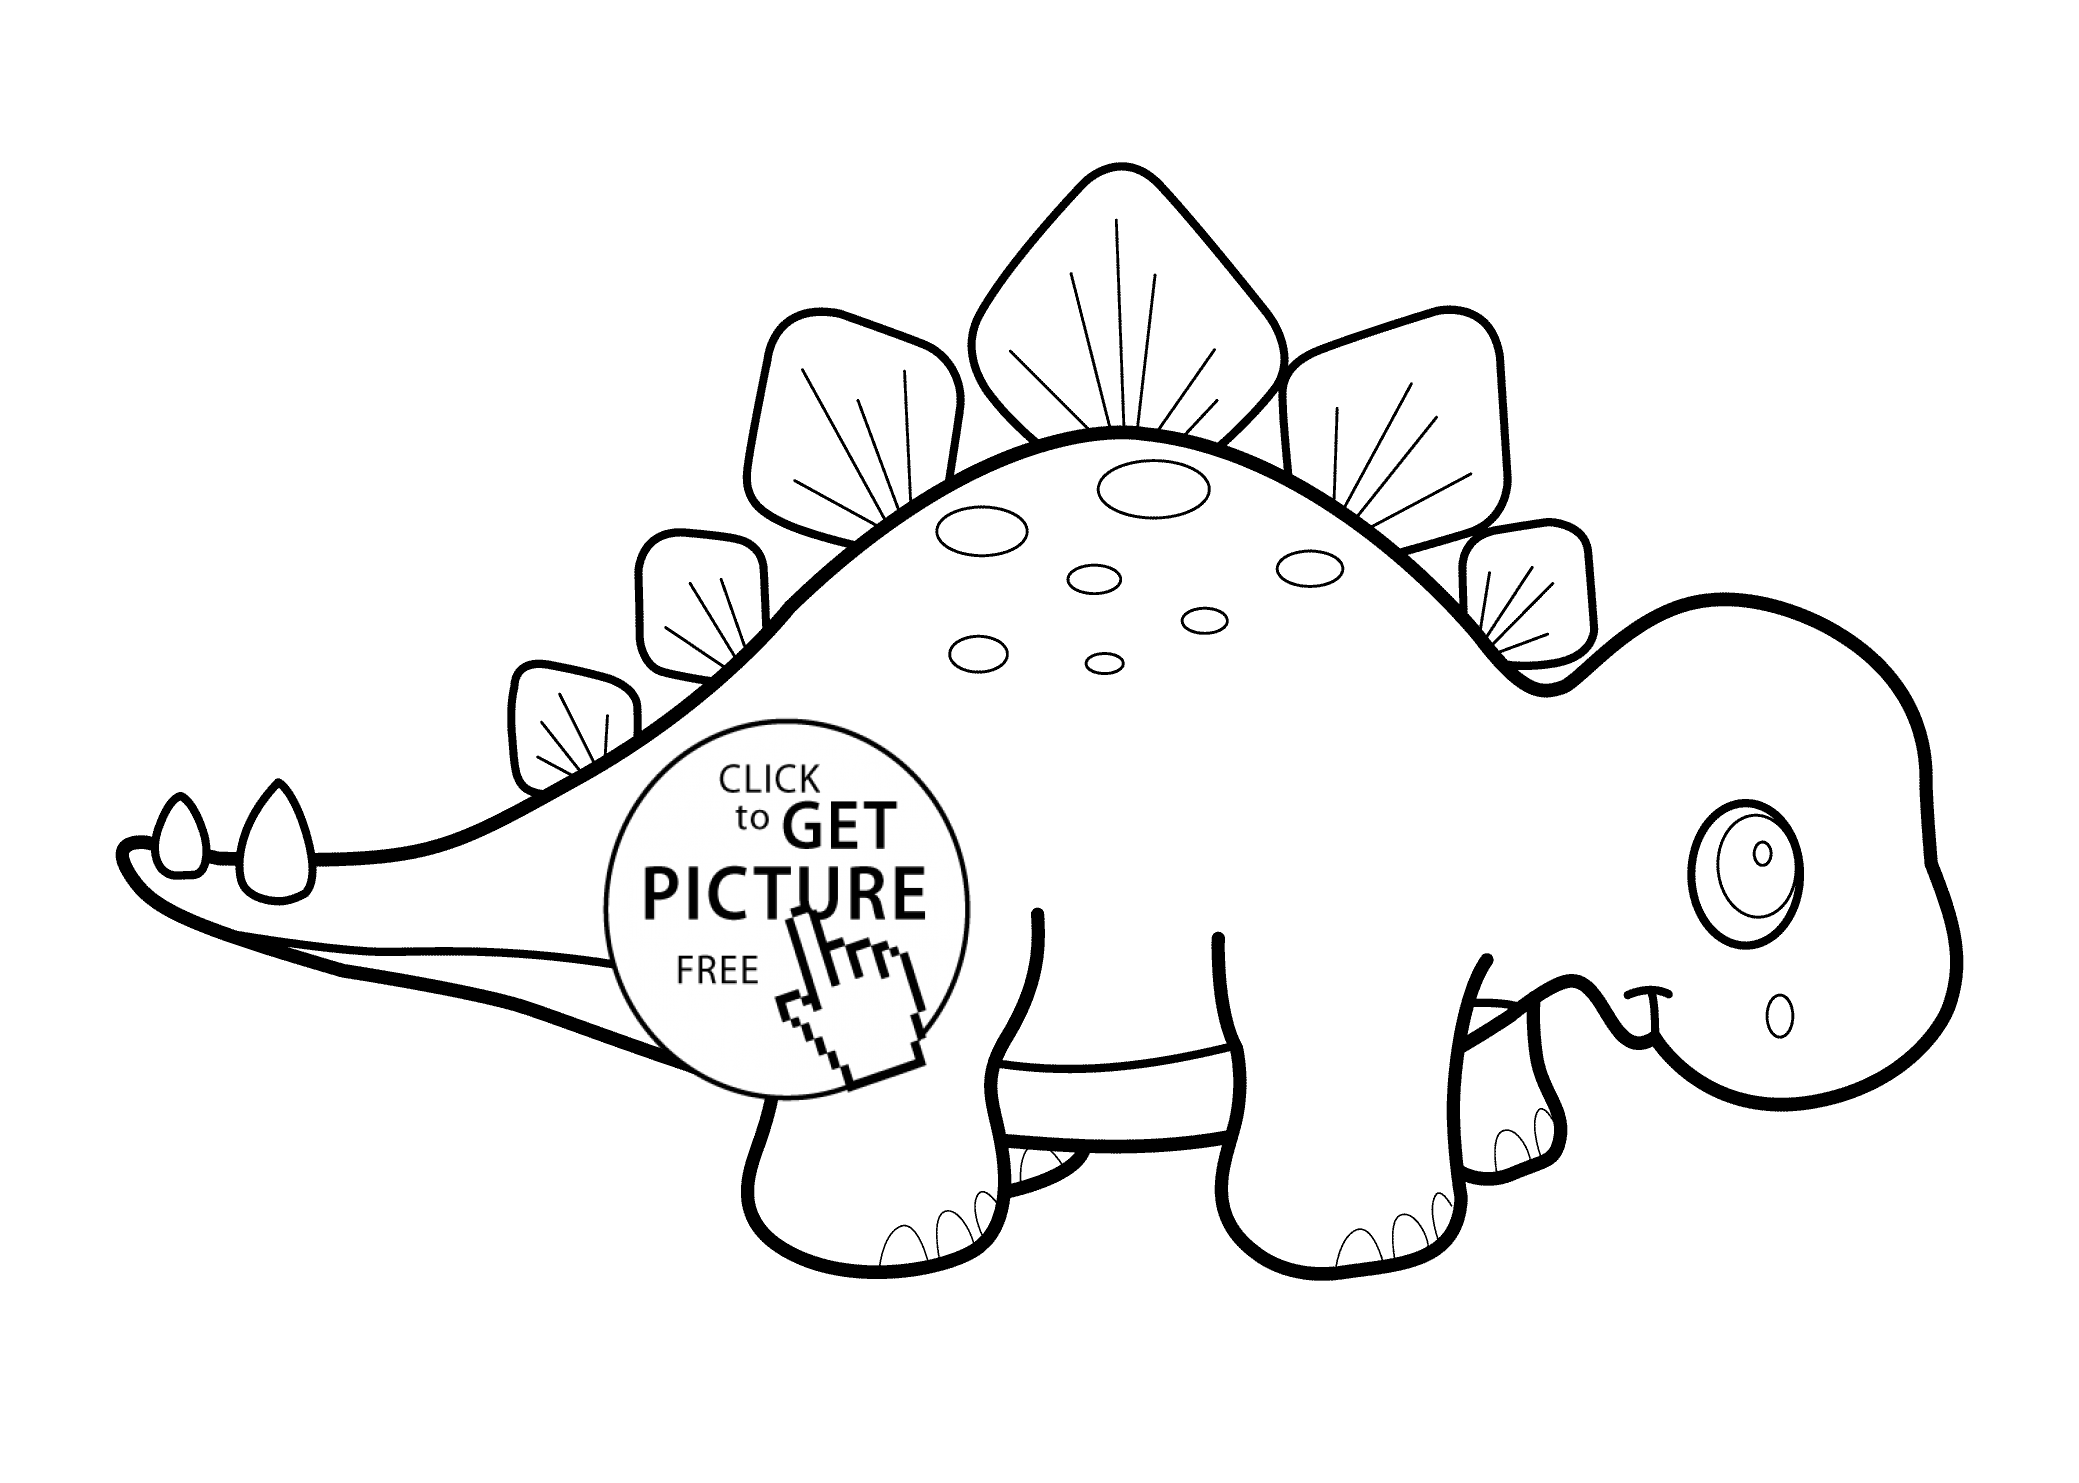 Little dinosaur stegosaurus cartoon coloring pages for kids, printable free